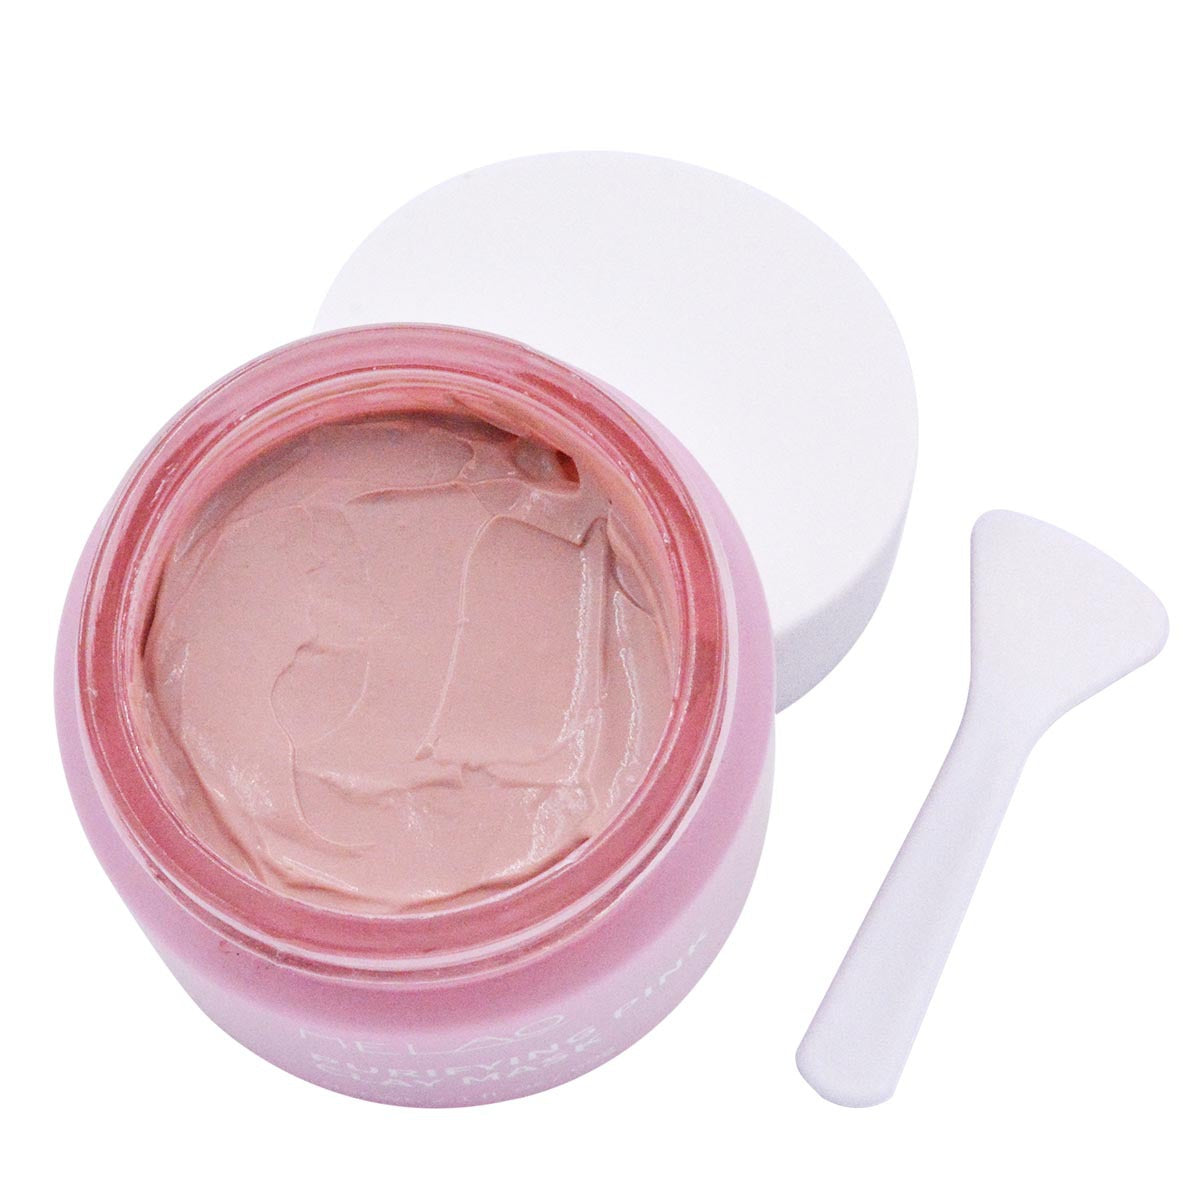 MELAO Purifying Pink Clay Mask